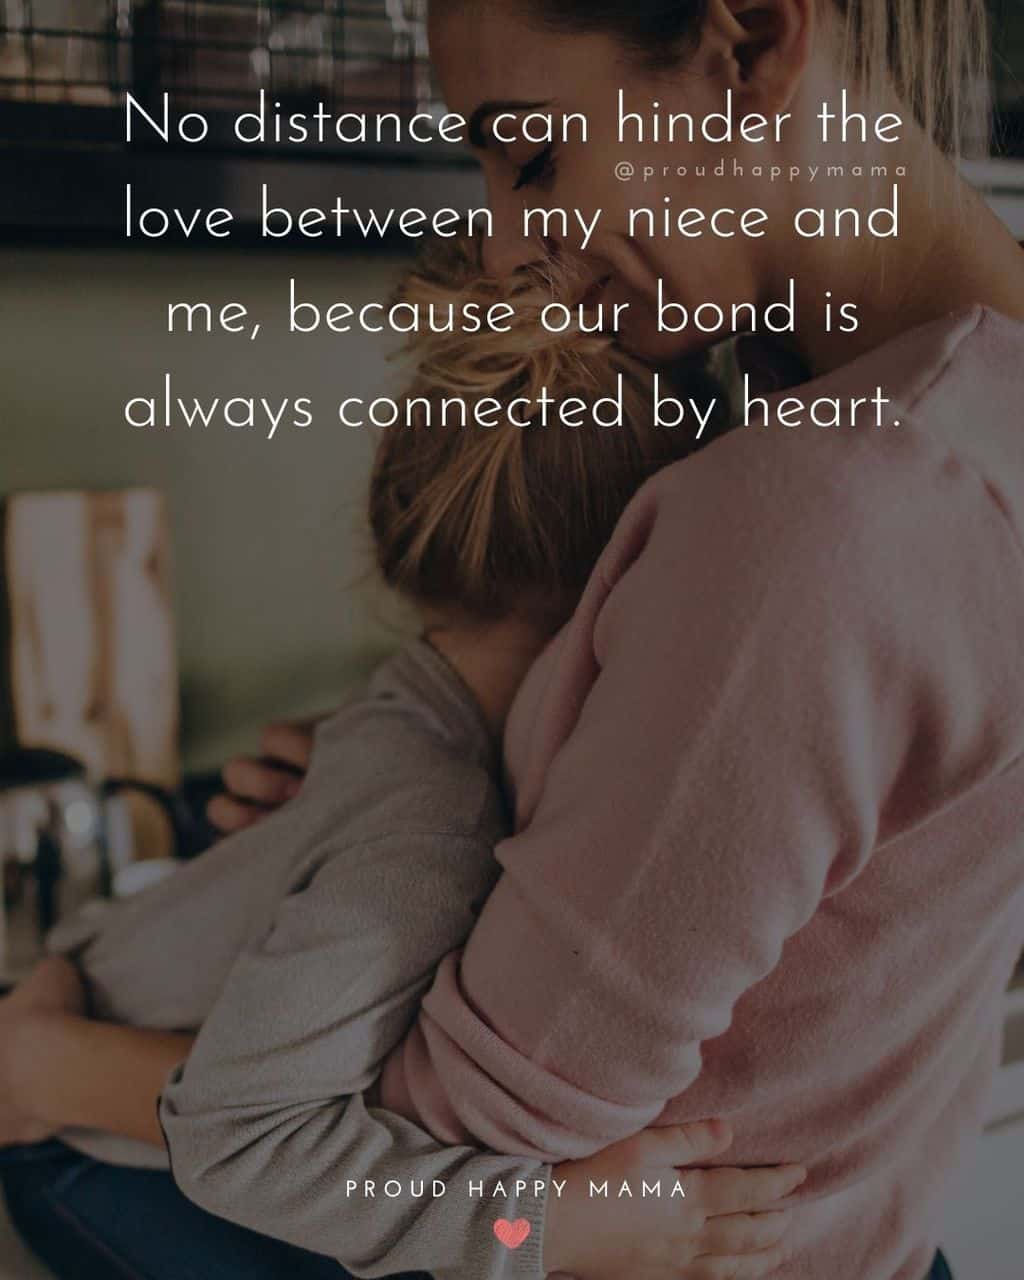 Niece Quotes - No distance can hinder the love between my niece and me, because our bond is always connected by heart.